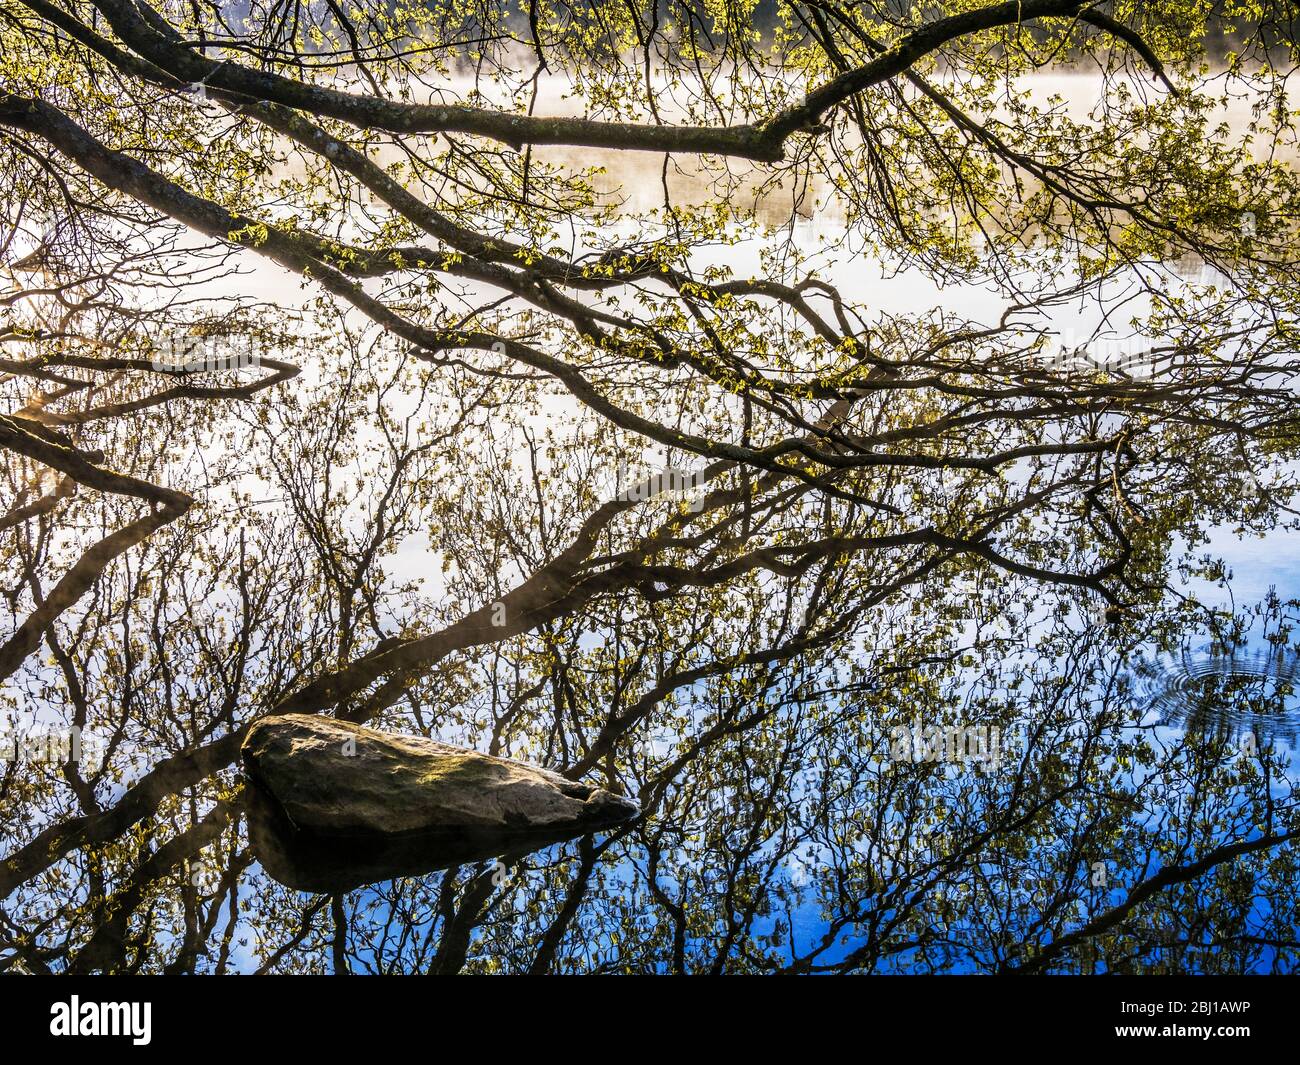 The branch of a tree and its reflection in the still water of a lake. Stock Photo